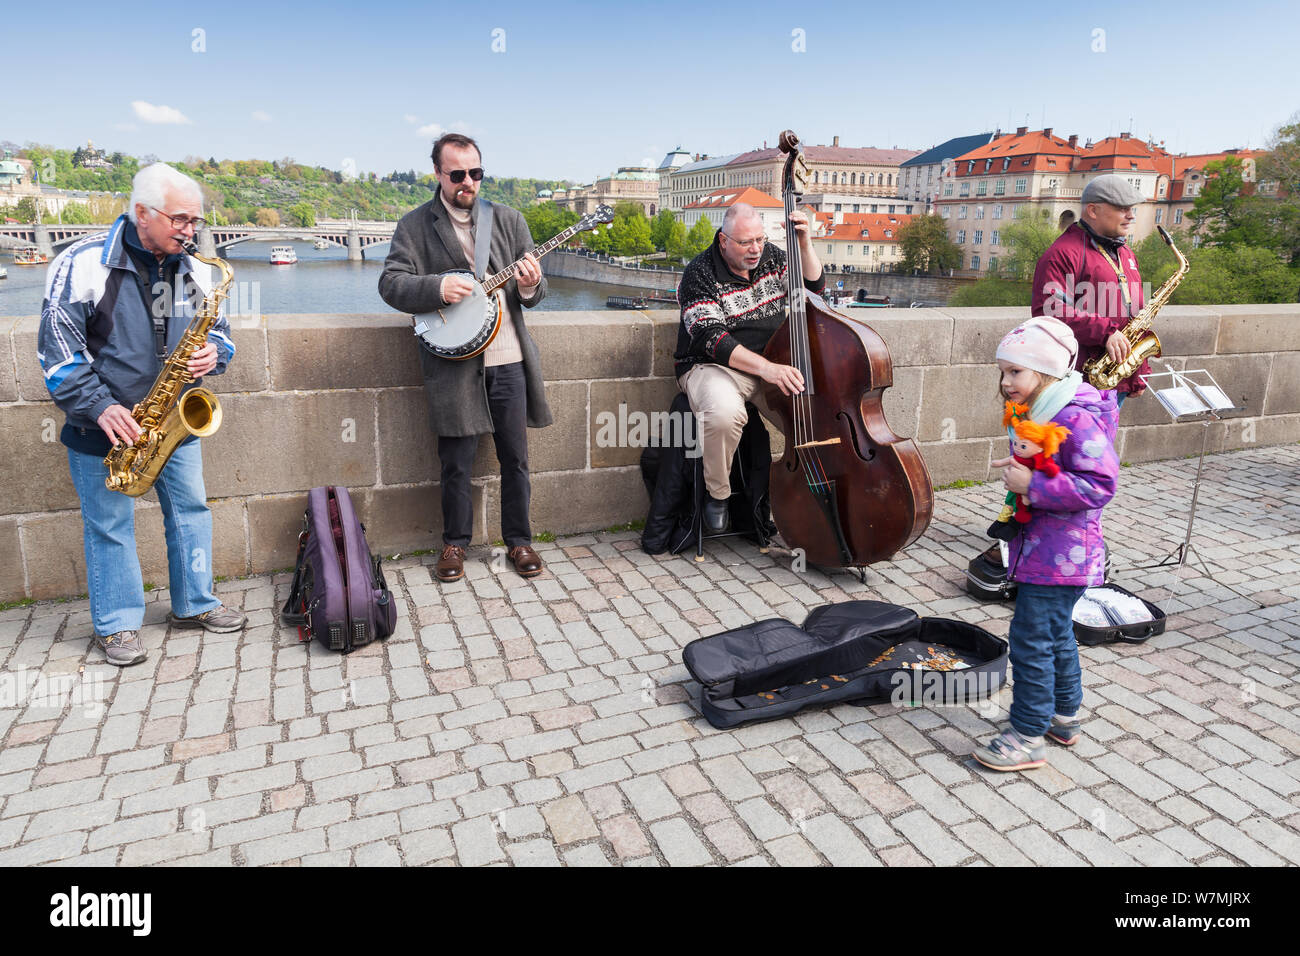 Prague, Czech Republic - April 30, 2017: Band of street musicians plays for tourists on the Charles Bridge in Prague. Little girl puts money in a guit Stock Photo